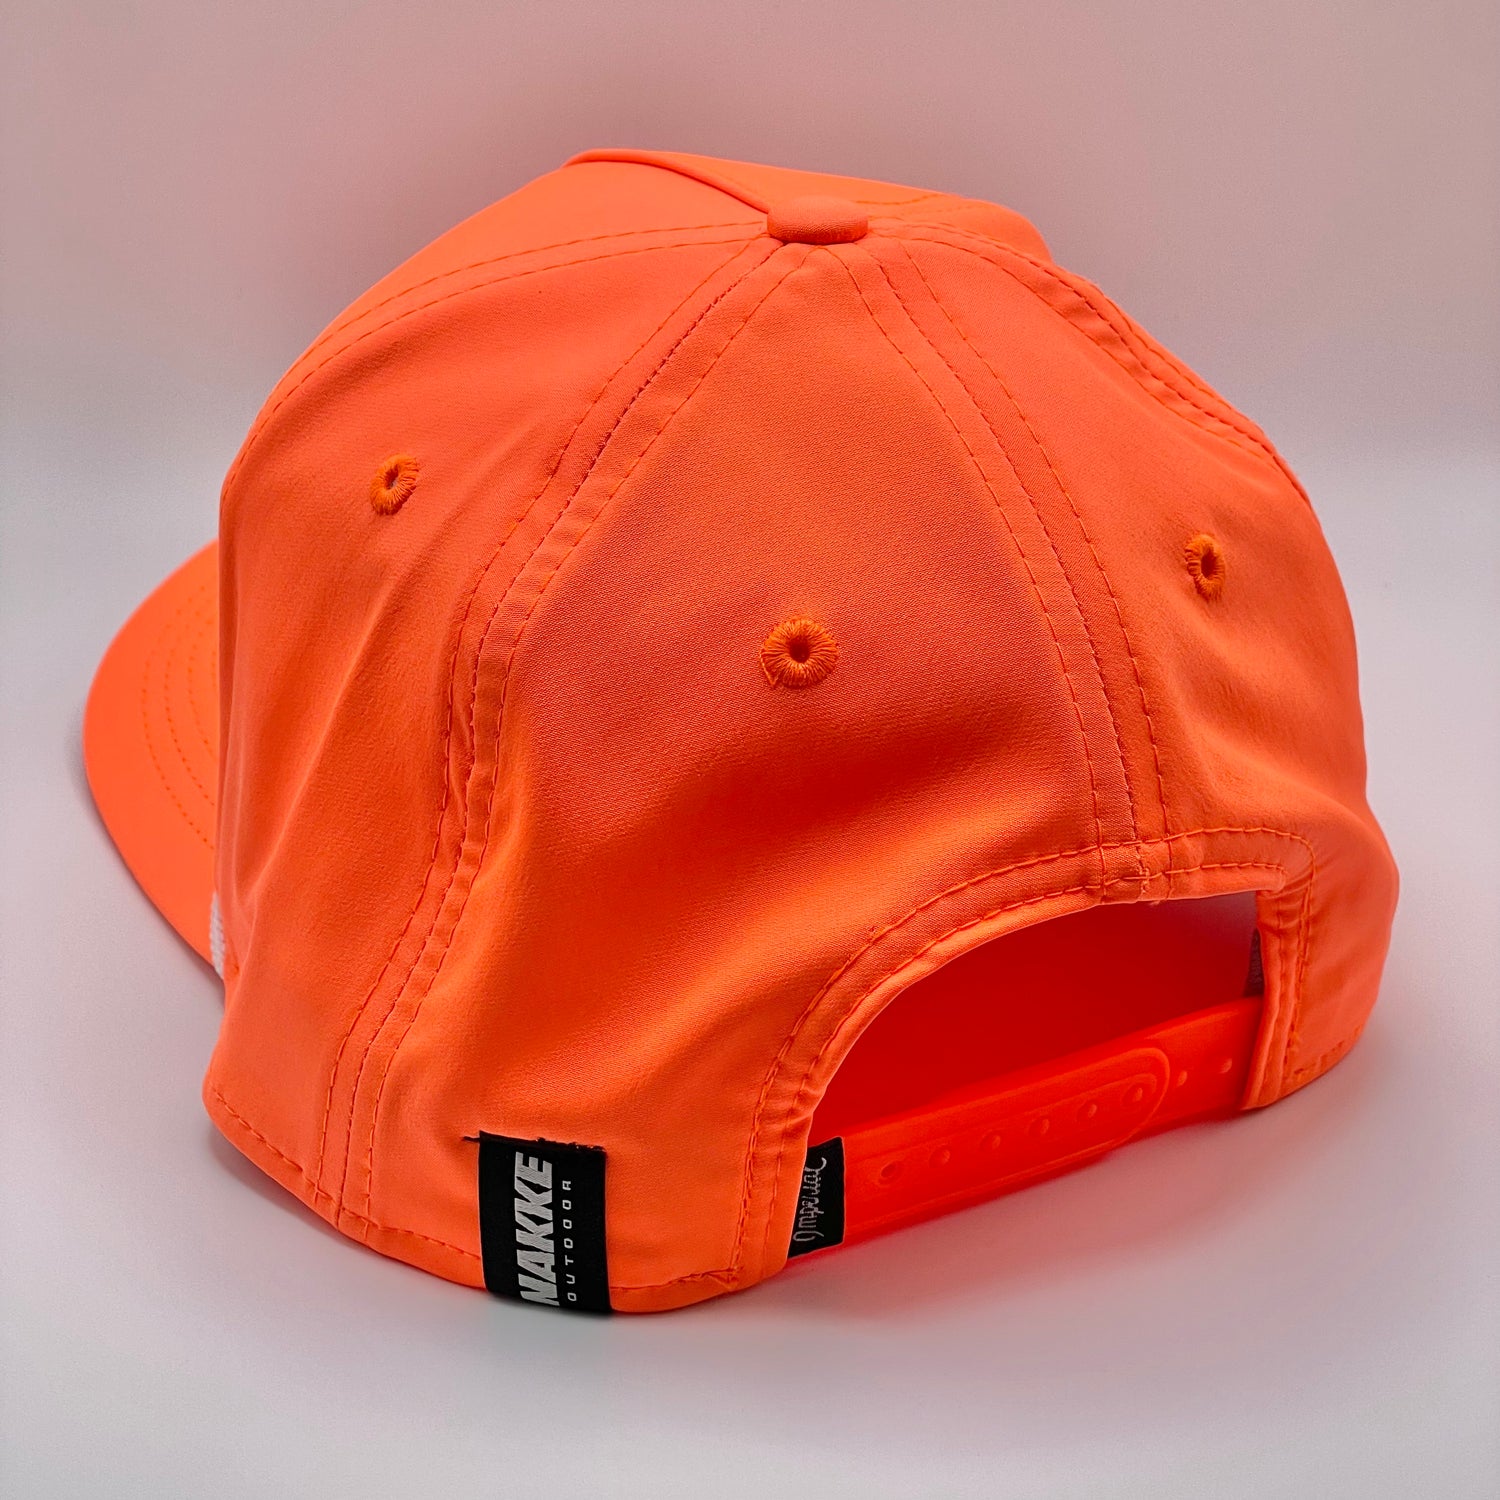 Neon Orange Retro Fit Hat with a black embroidered fish and white woven rope